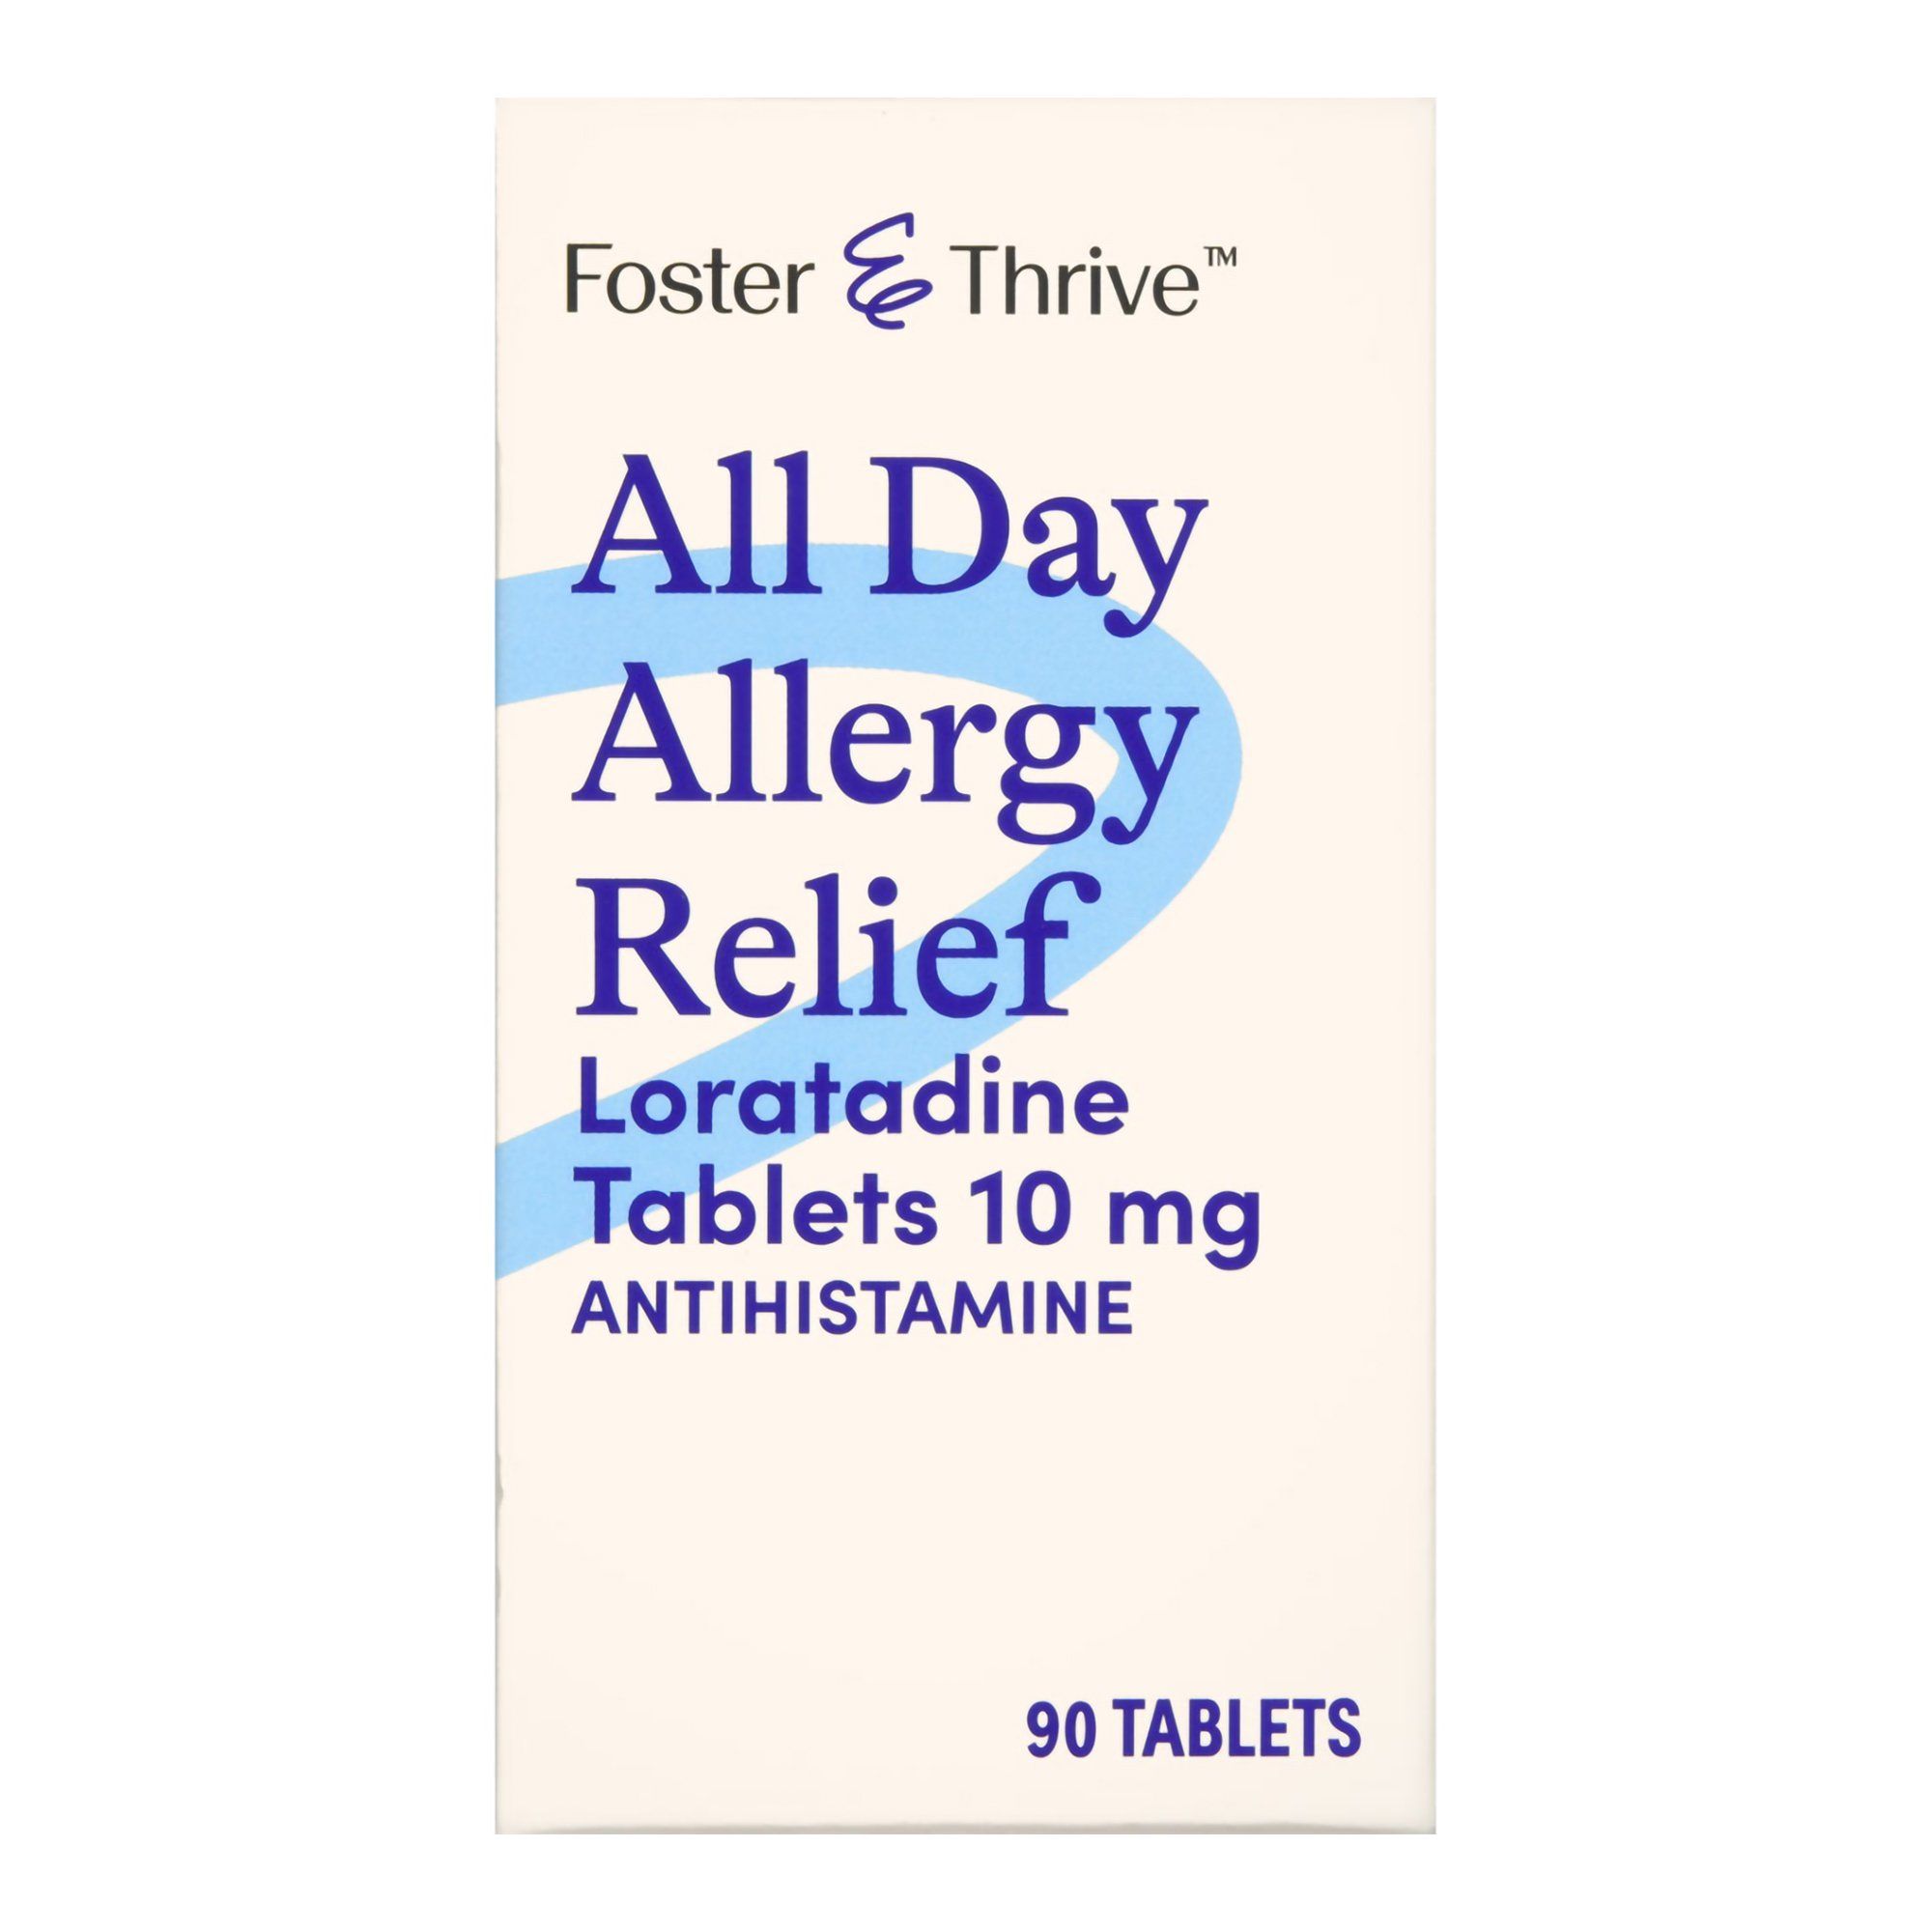 Foster & Thrive All Day Allergy Relief Loratadine Tablets, 10 mg -  90 ct